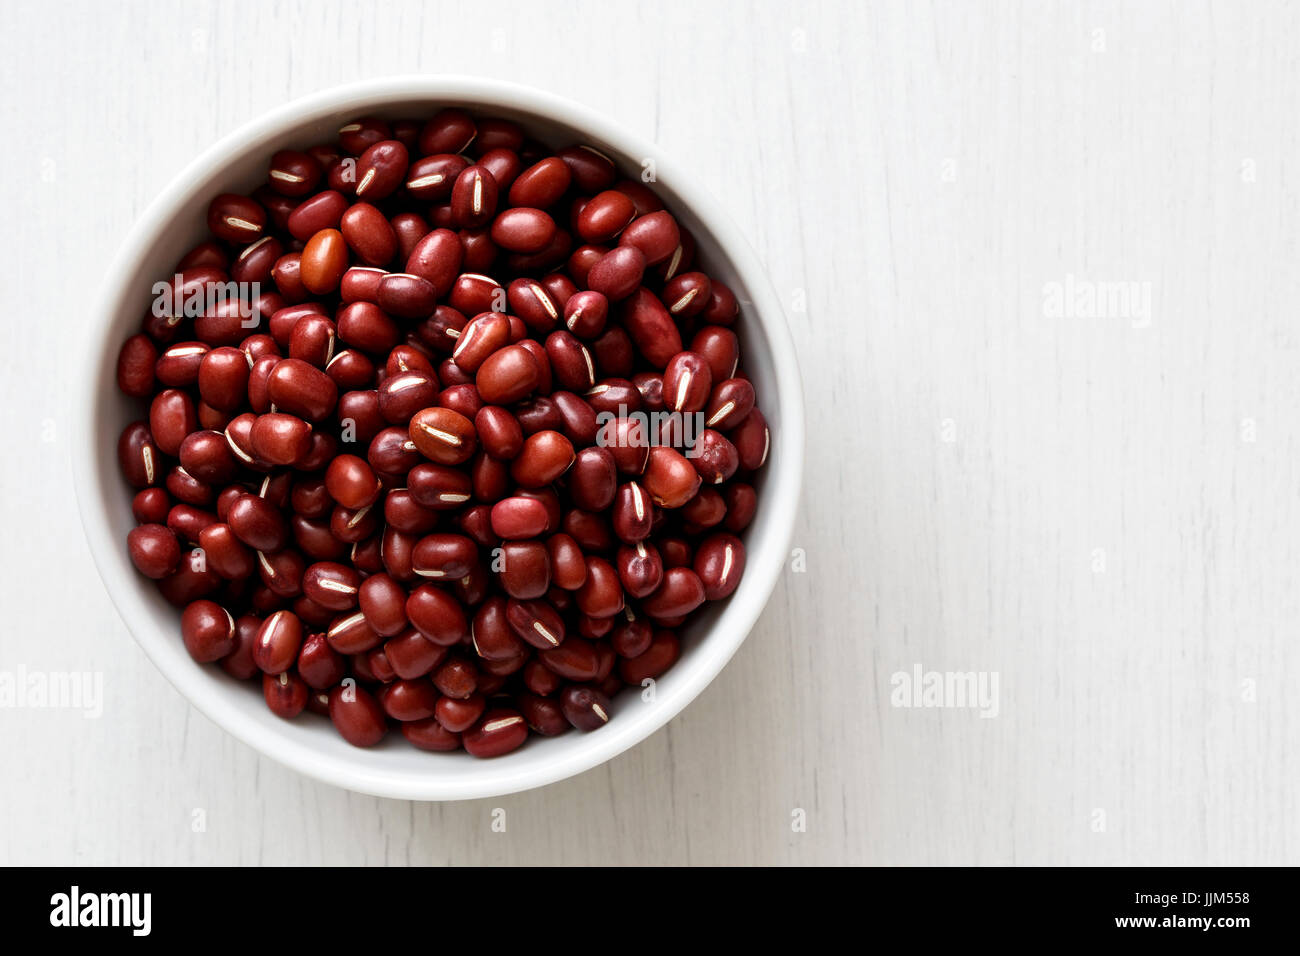 Dry adzuki beans  in white ceramic bowl isolated on painted white wood from above. Stock Photo